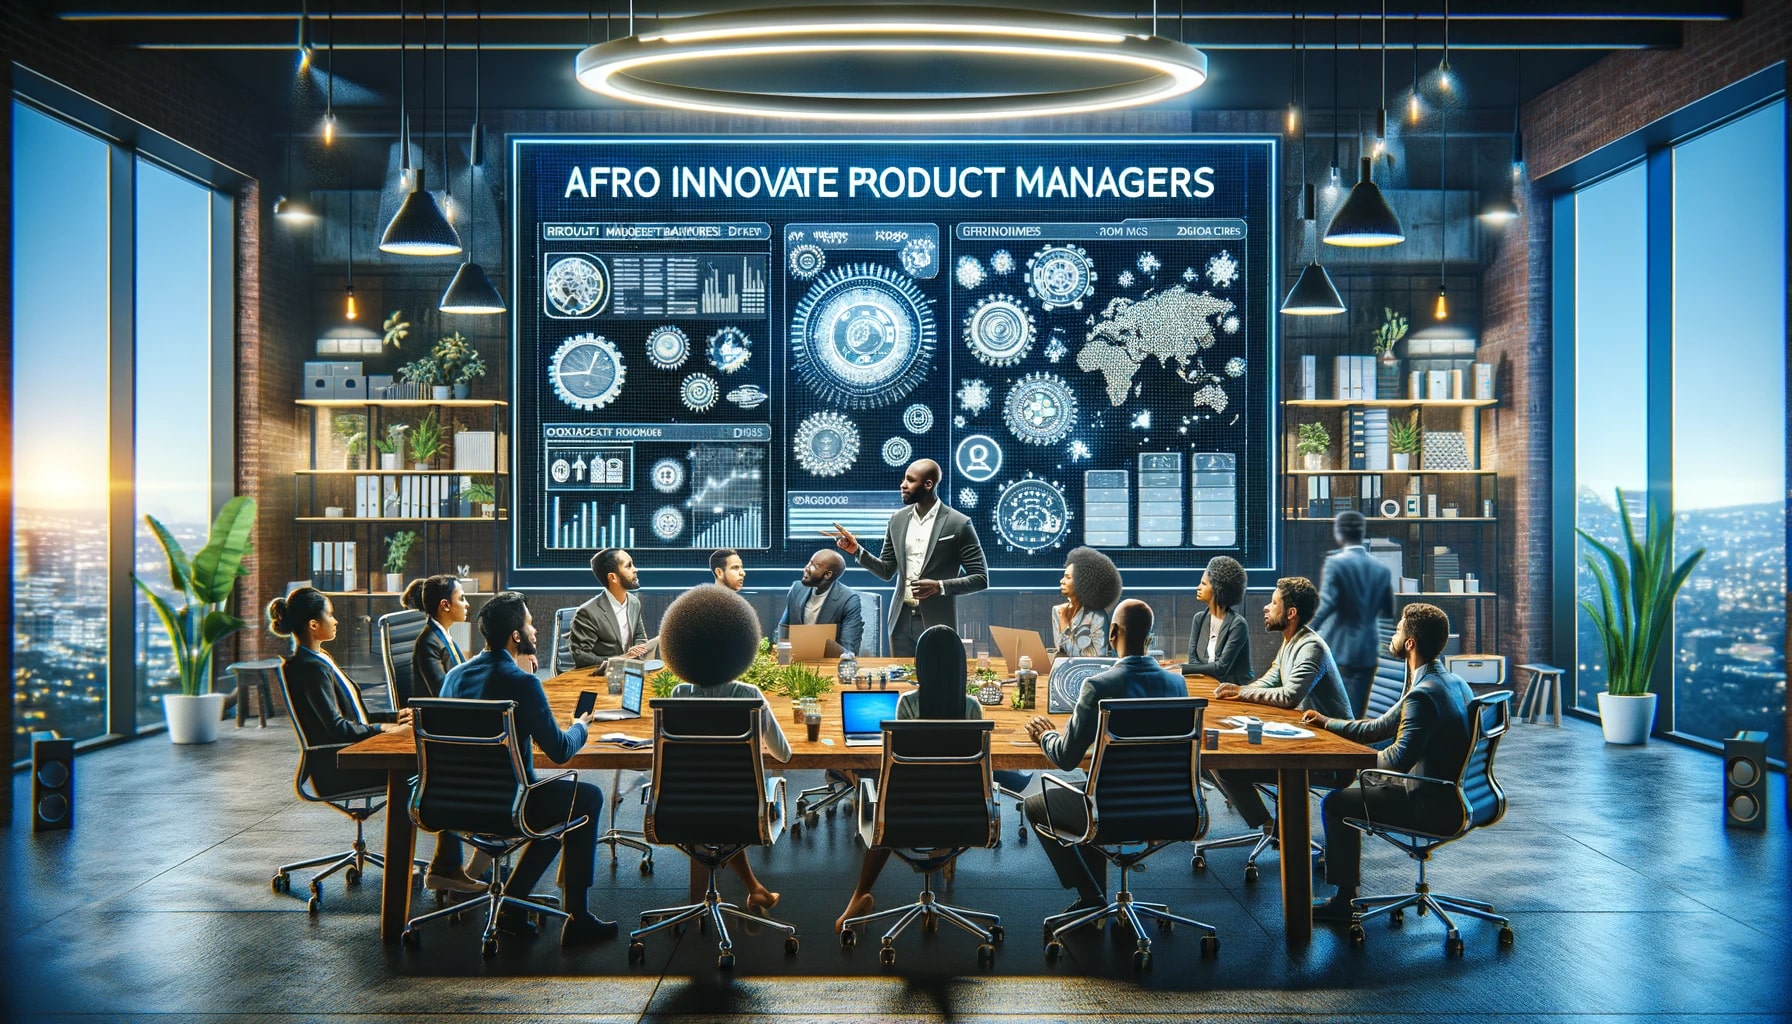 AfroInnovate Product Managers